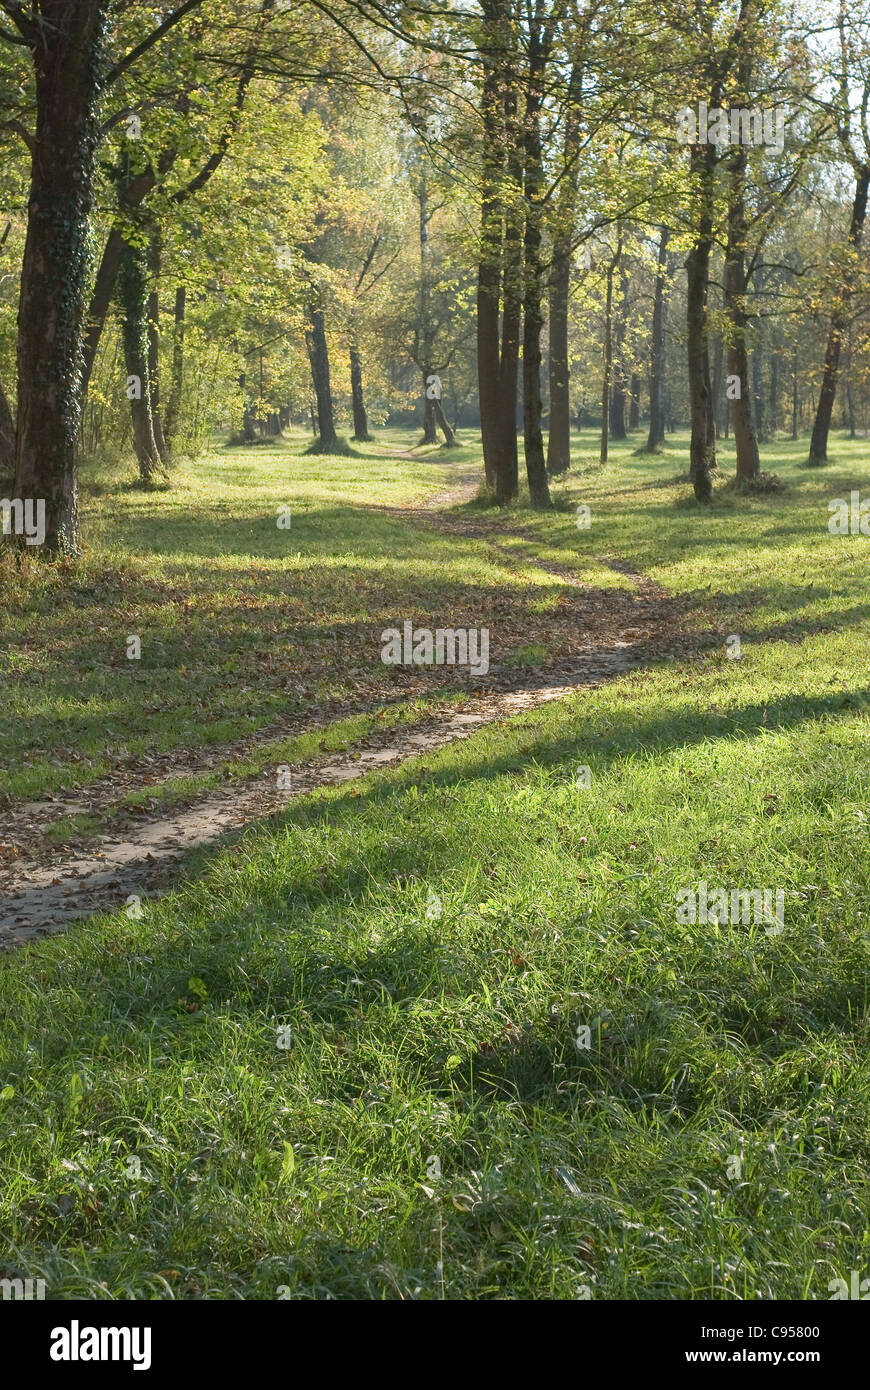 Low Light Landscape with Trail and Grassy Meadow Stock Photo